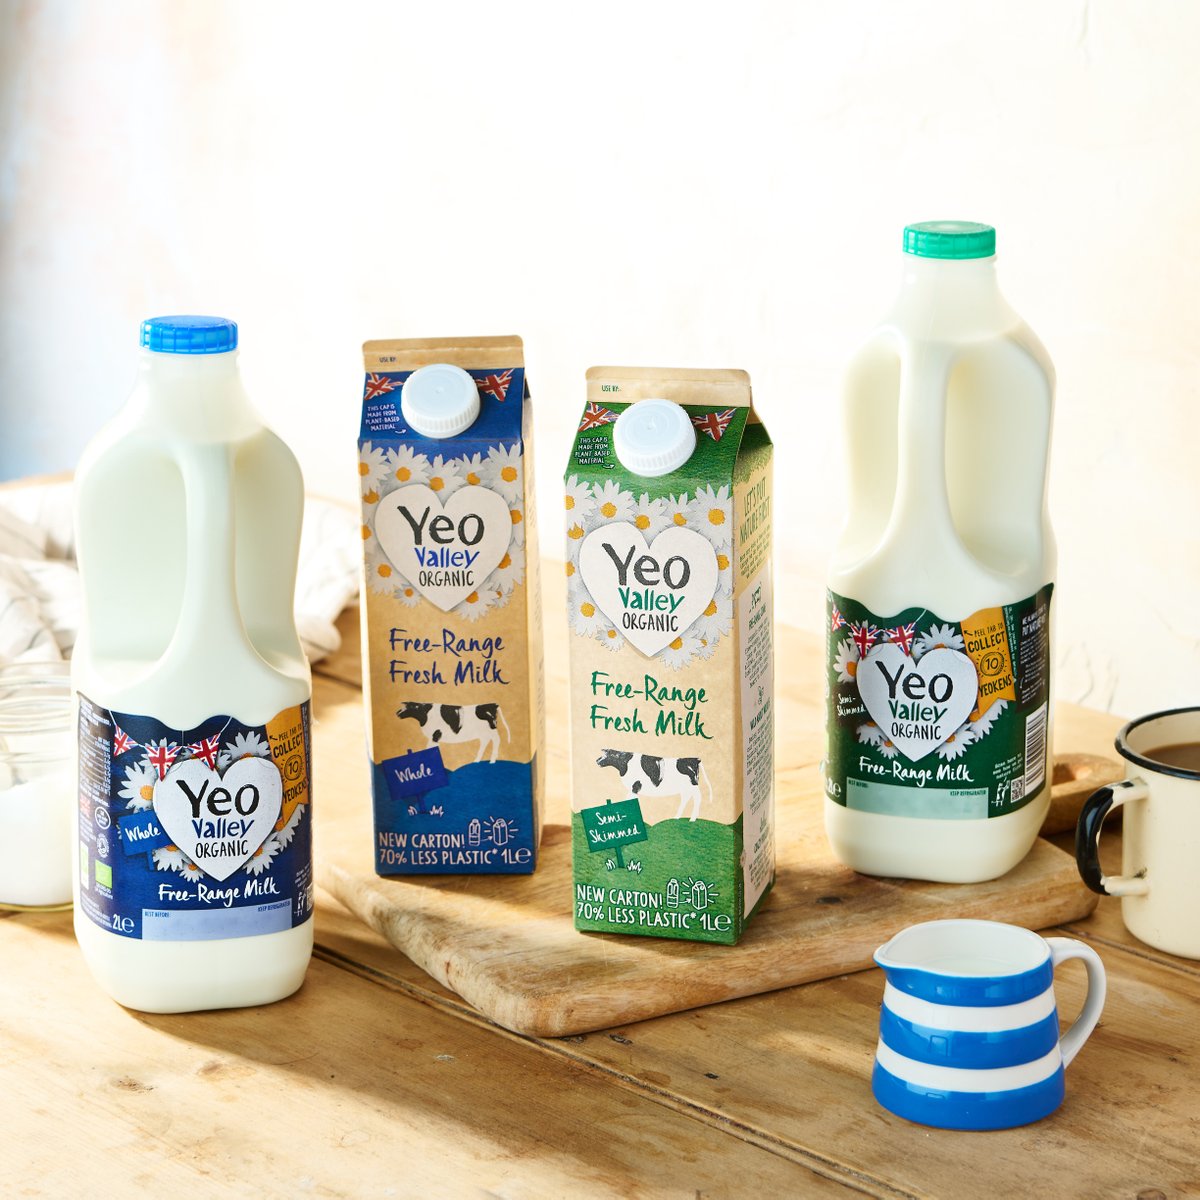 Our creamiest milk just got a makeover! ⭐️ It’s the same great-tasting Fresh Organic Milk, but now available in a 1L carton, fully recyclable and made with 70% less plastic than our previous bottles. Find out more 👉 bit.ly/3tj7BOd 🔗 #YeoValley #YeoValleyOrganic